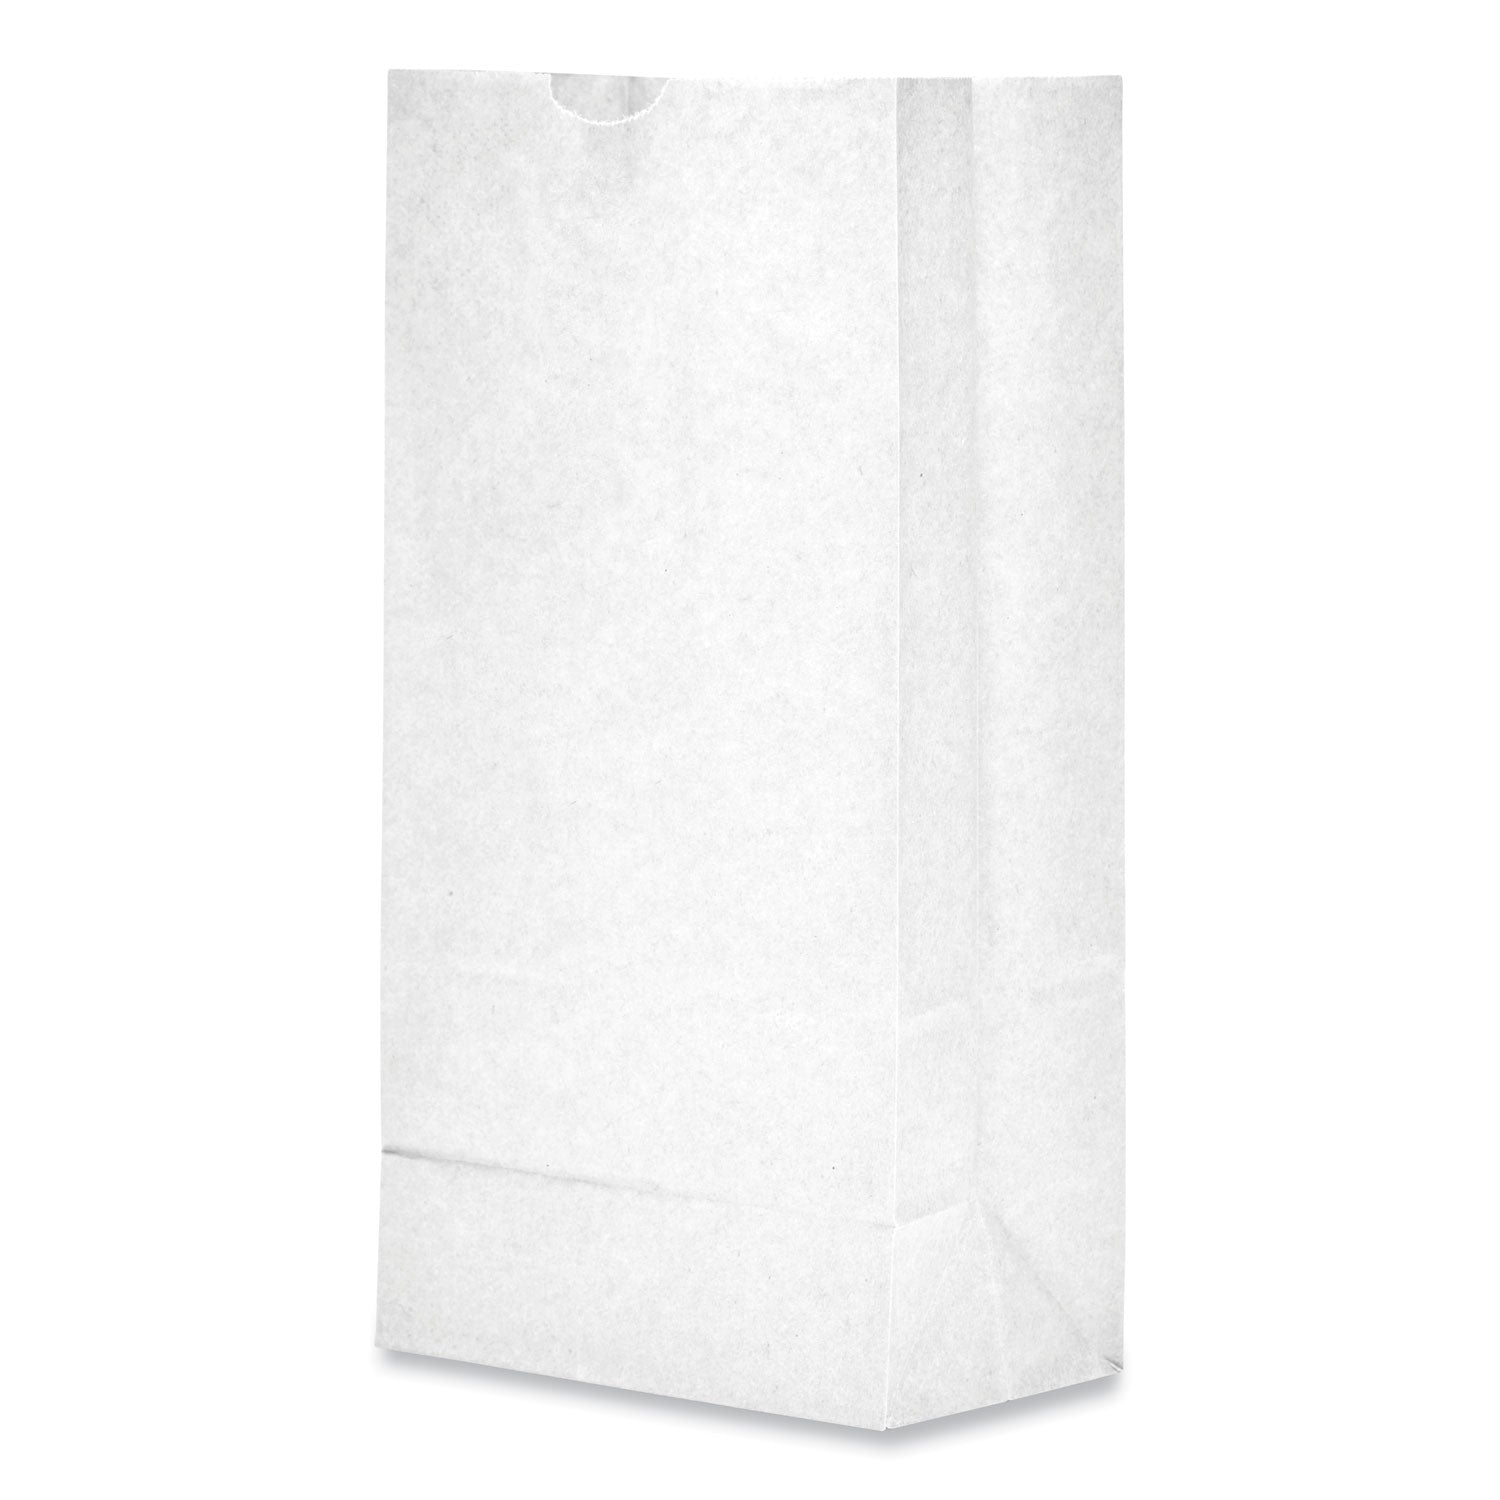 grocery-paper-bags-35-lb-capacity-#8-613-x-417-x-1244-white-500-bags_baggw8500 - 2